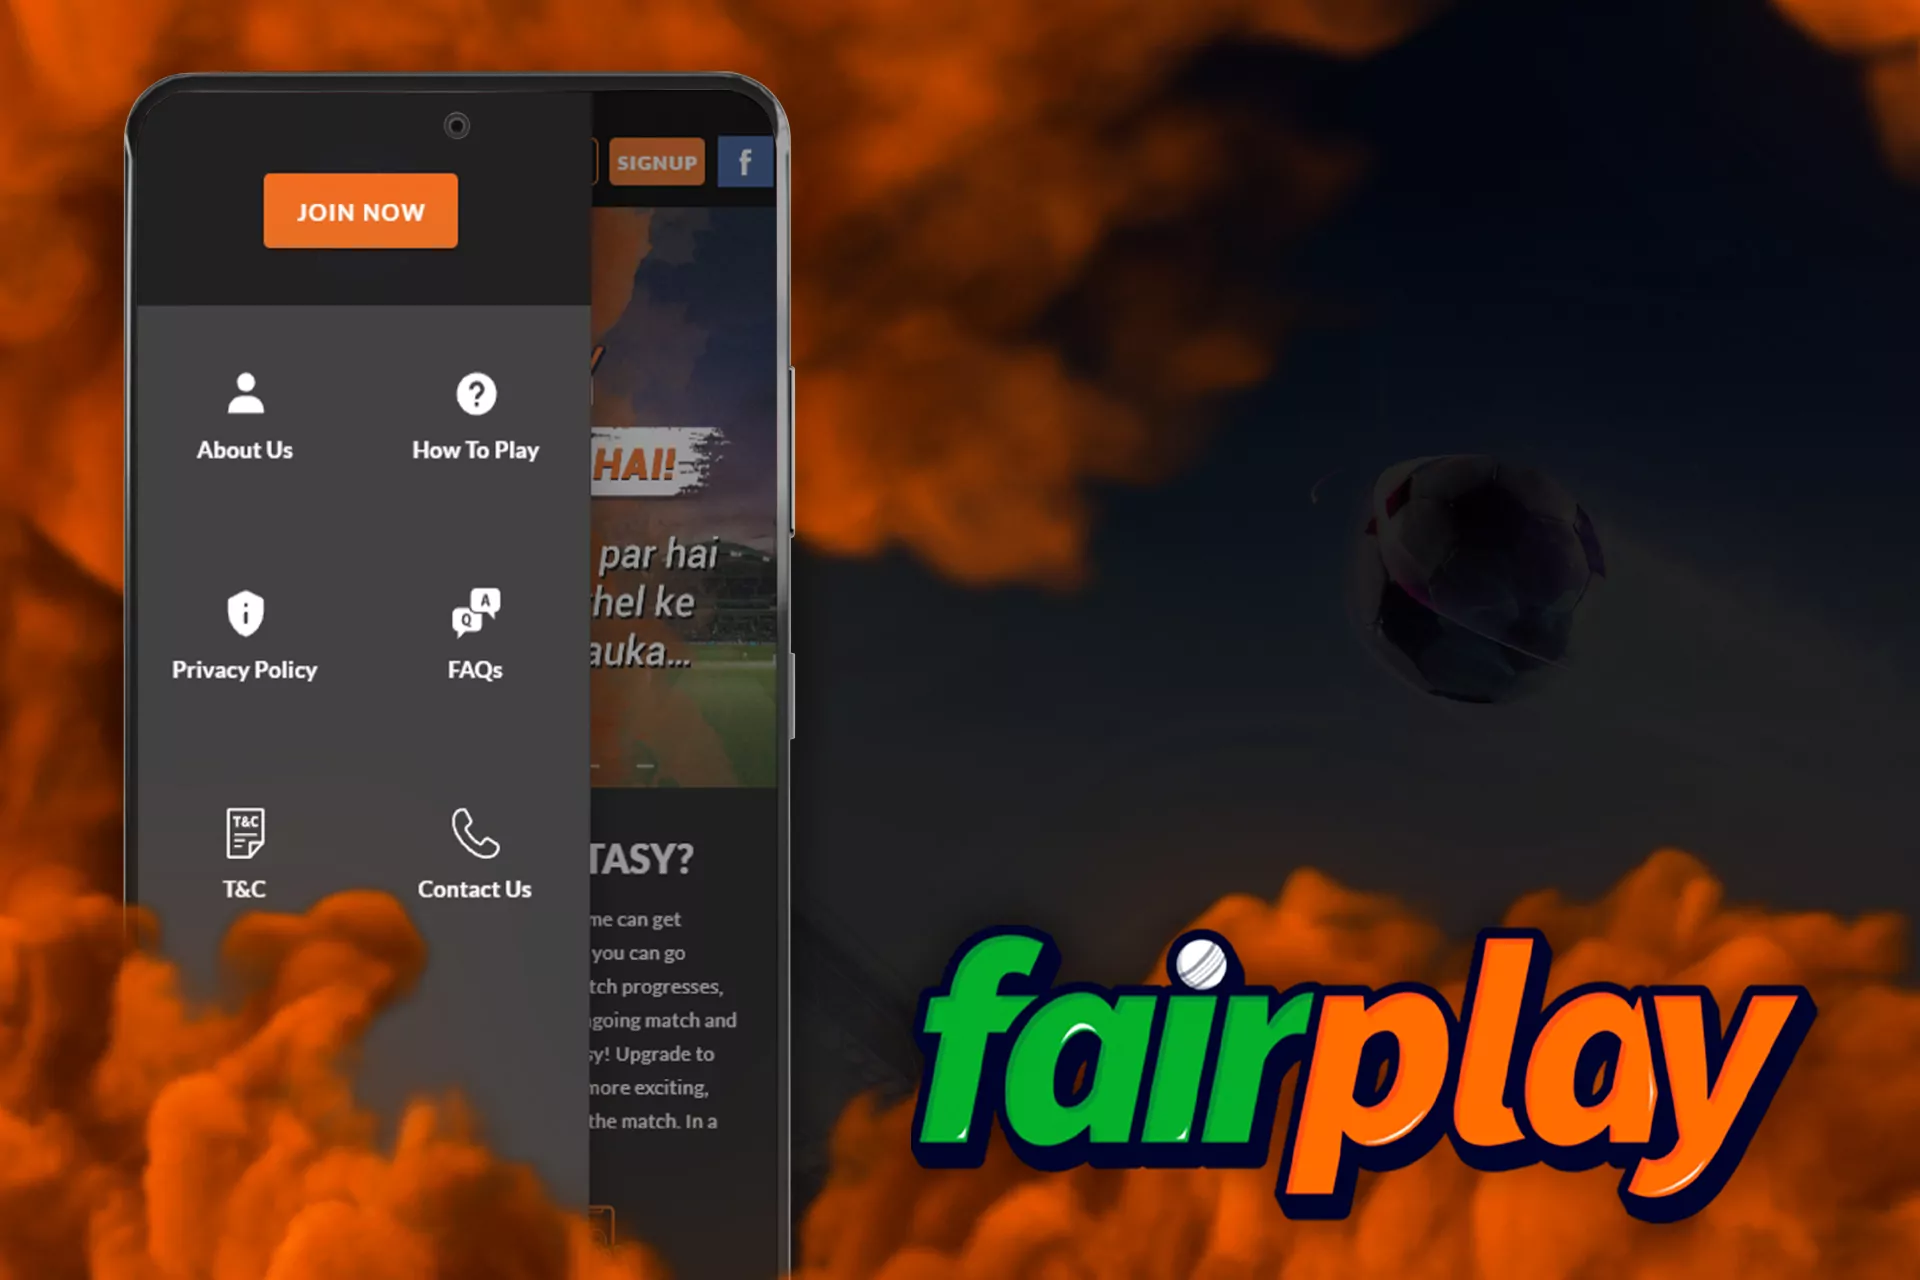 Bet on virtual sports in the Fairplay app.